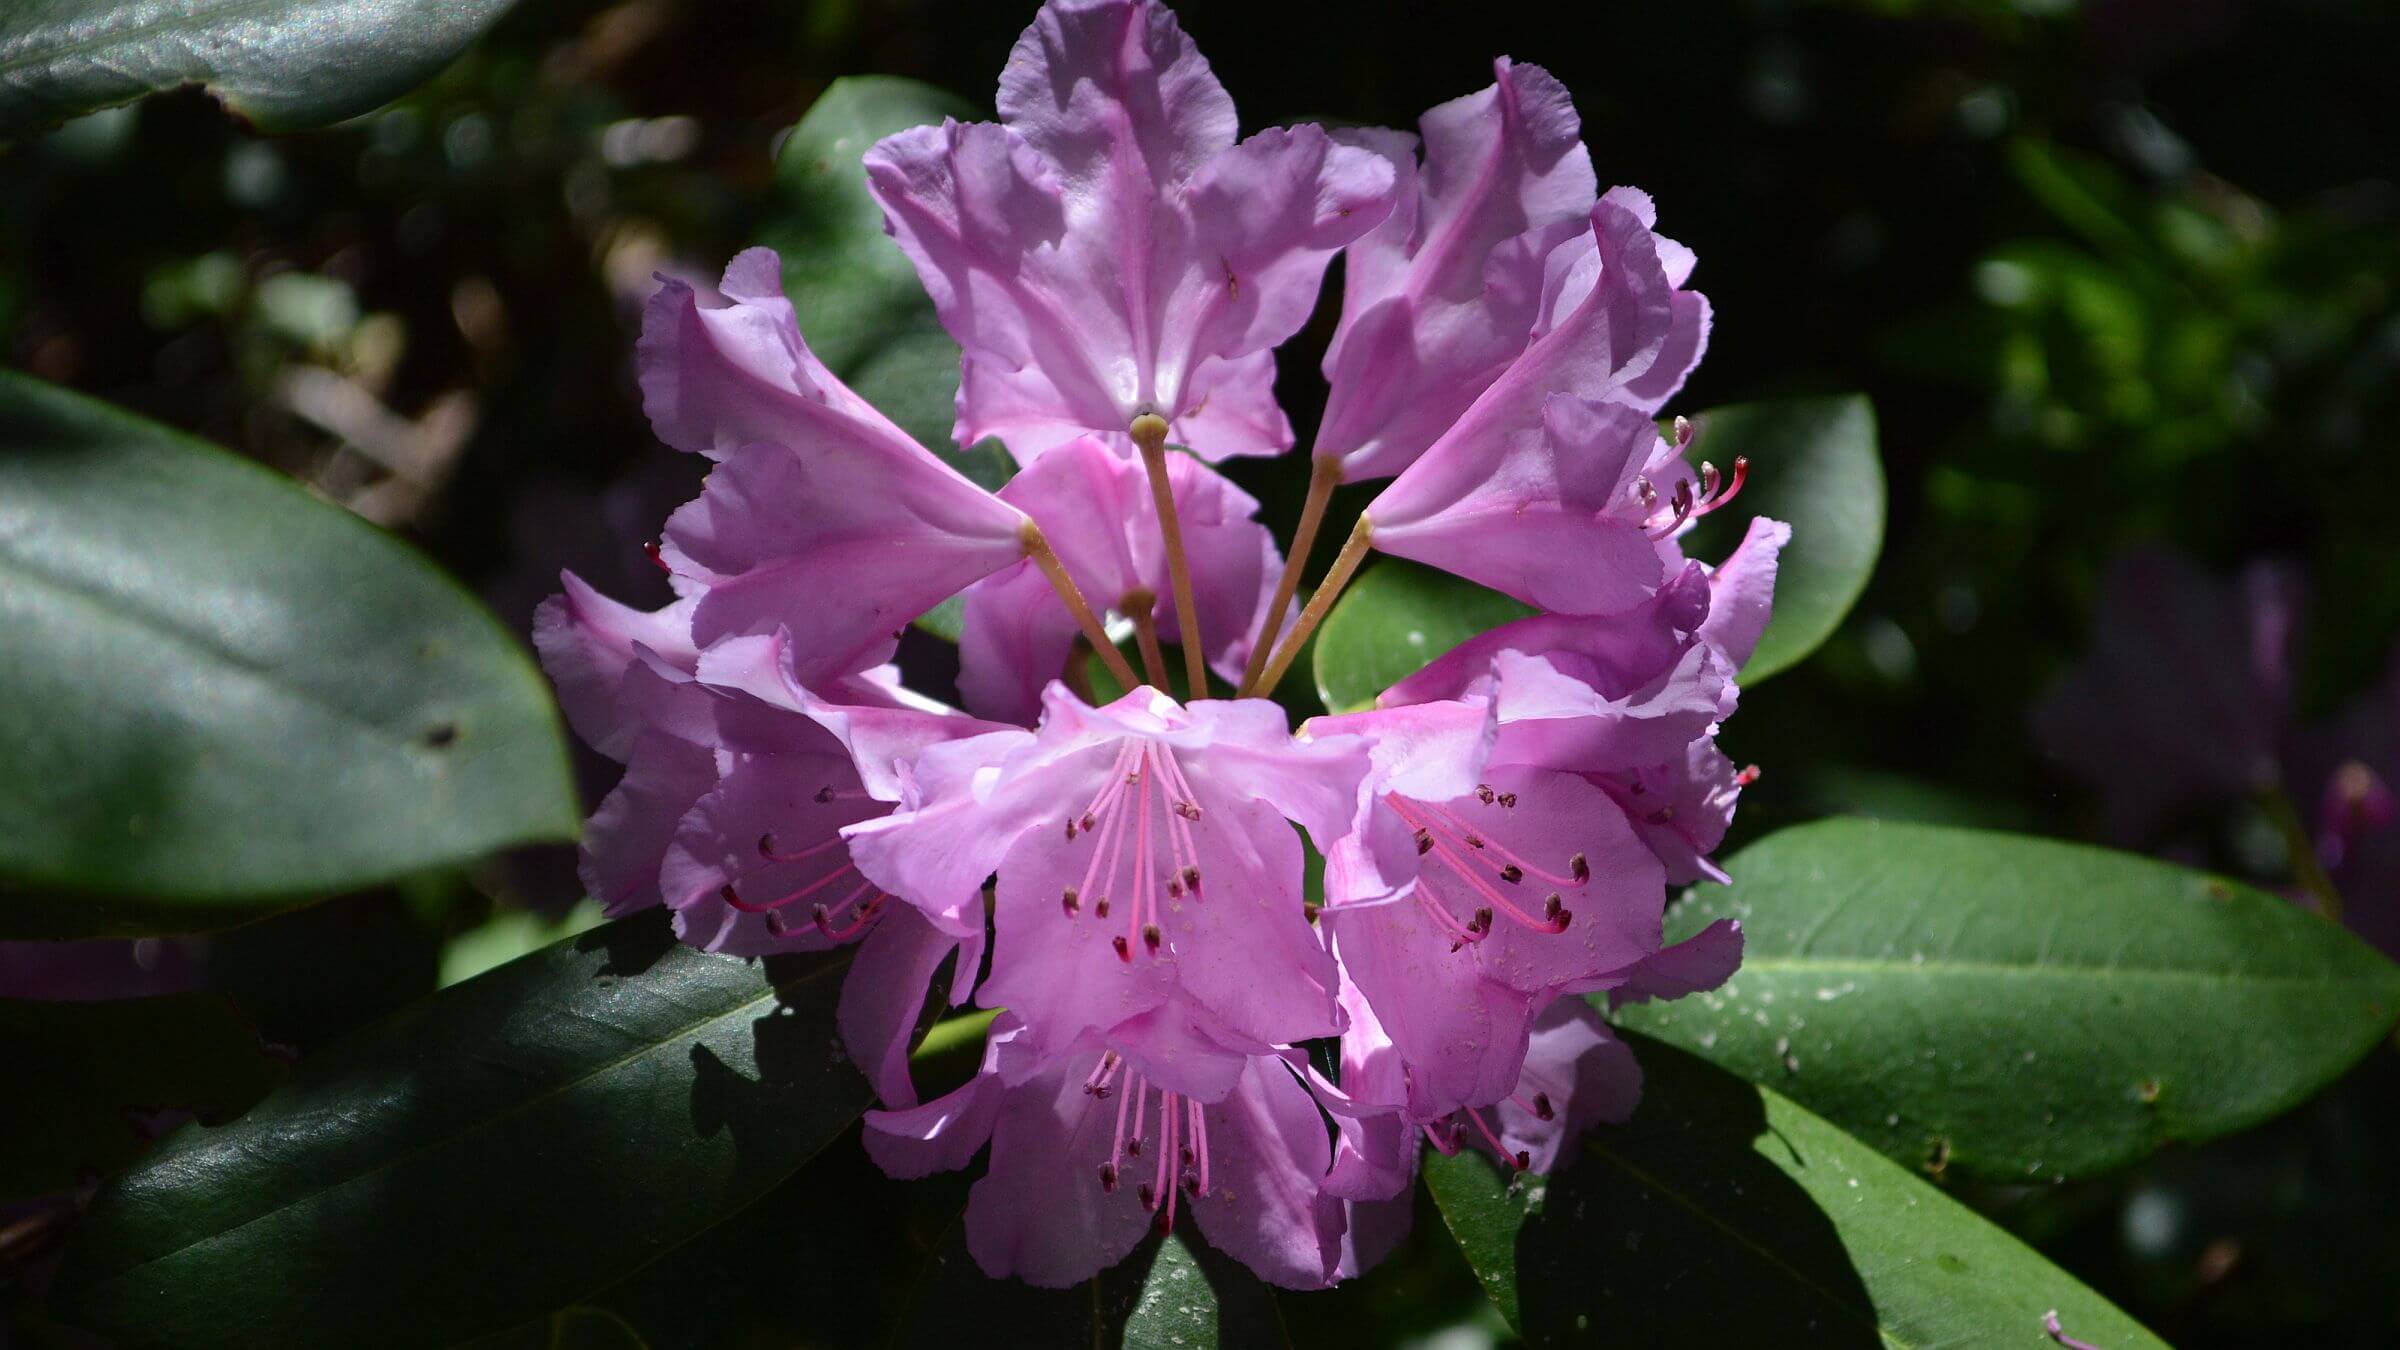 Saint Mary's Wilderness, rhododendron (Rhododendron catawbiense), June